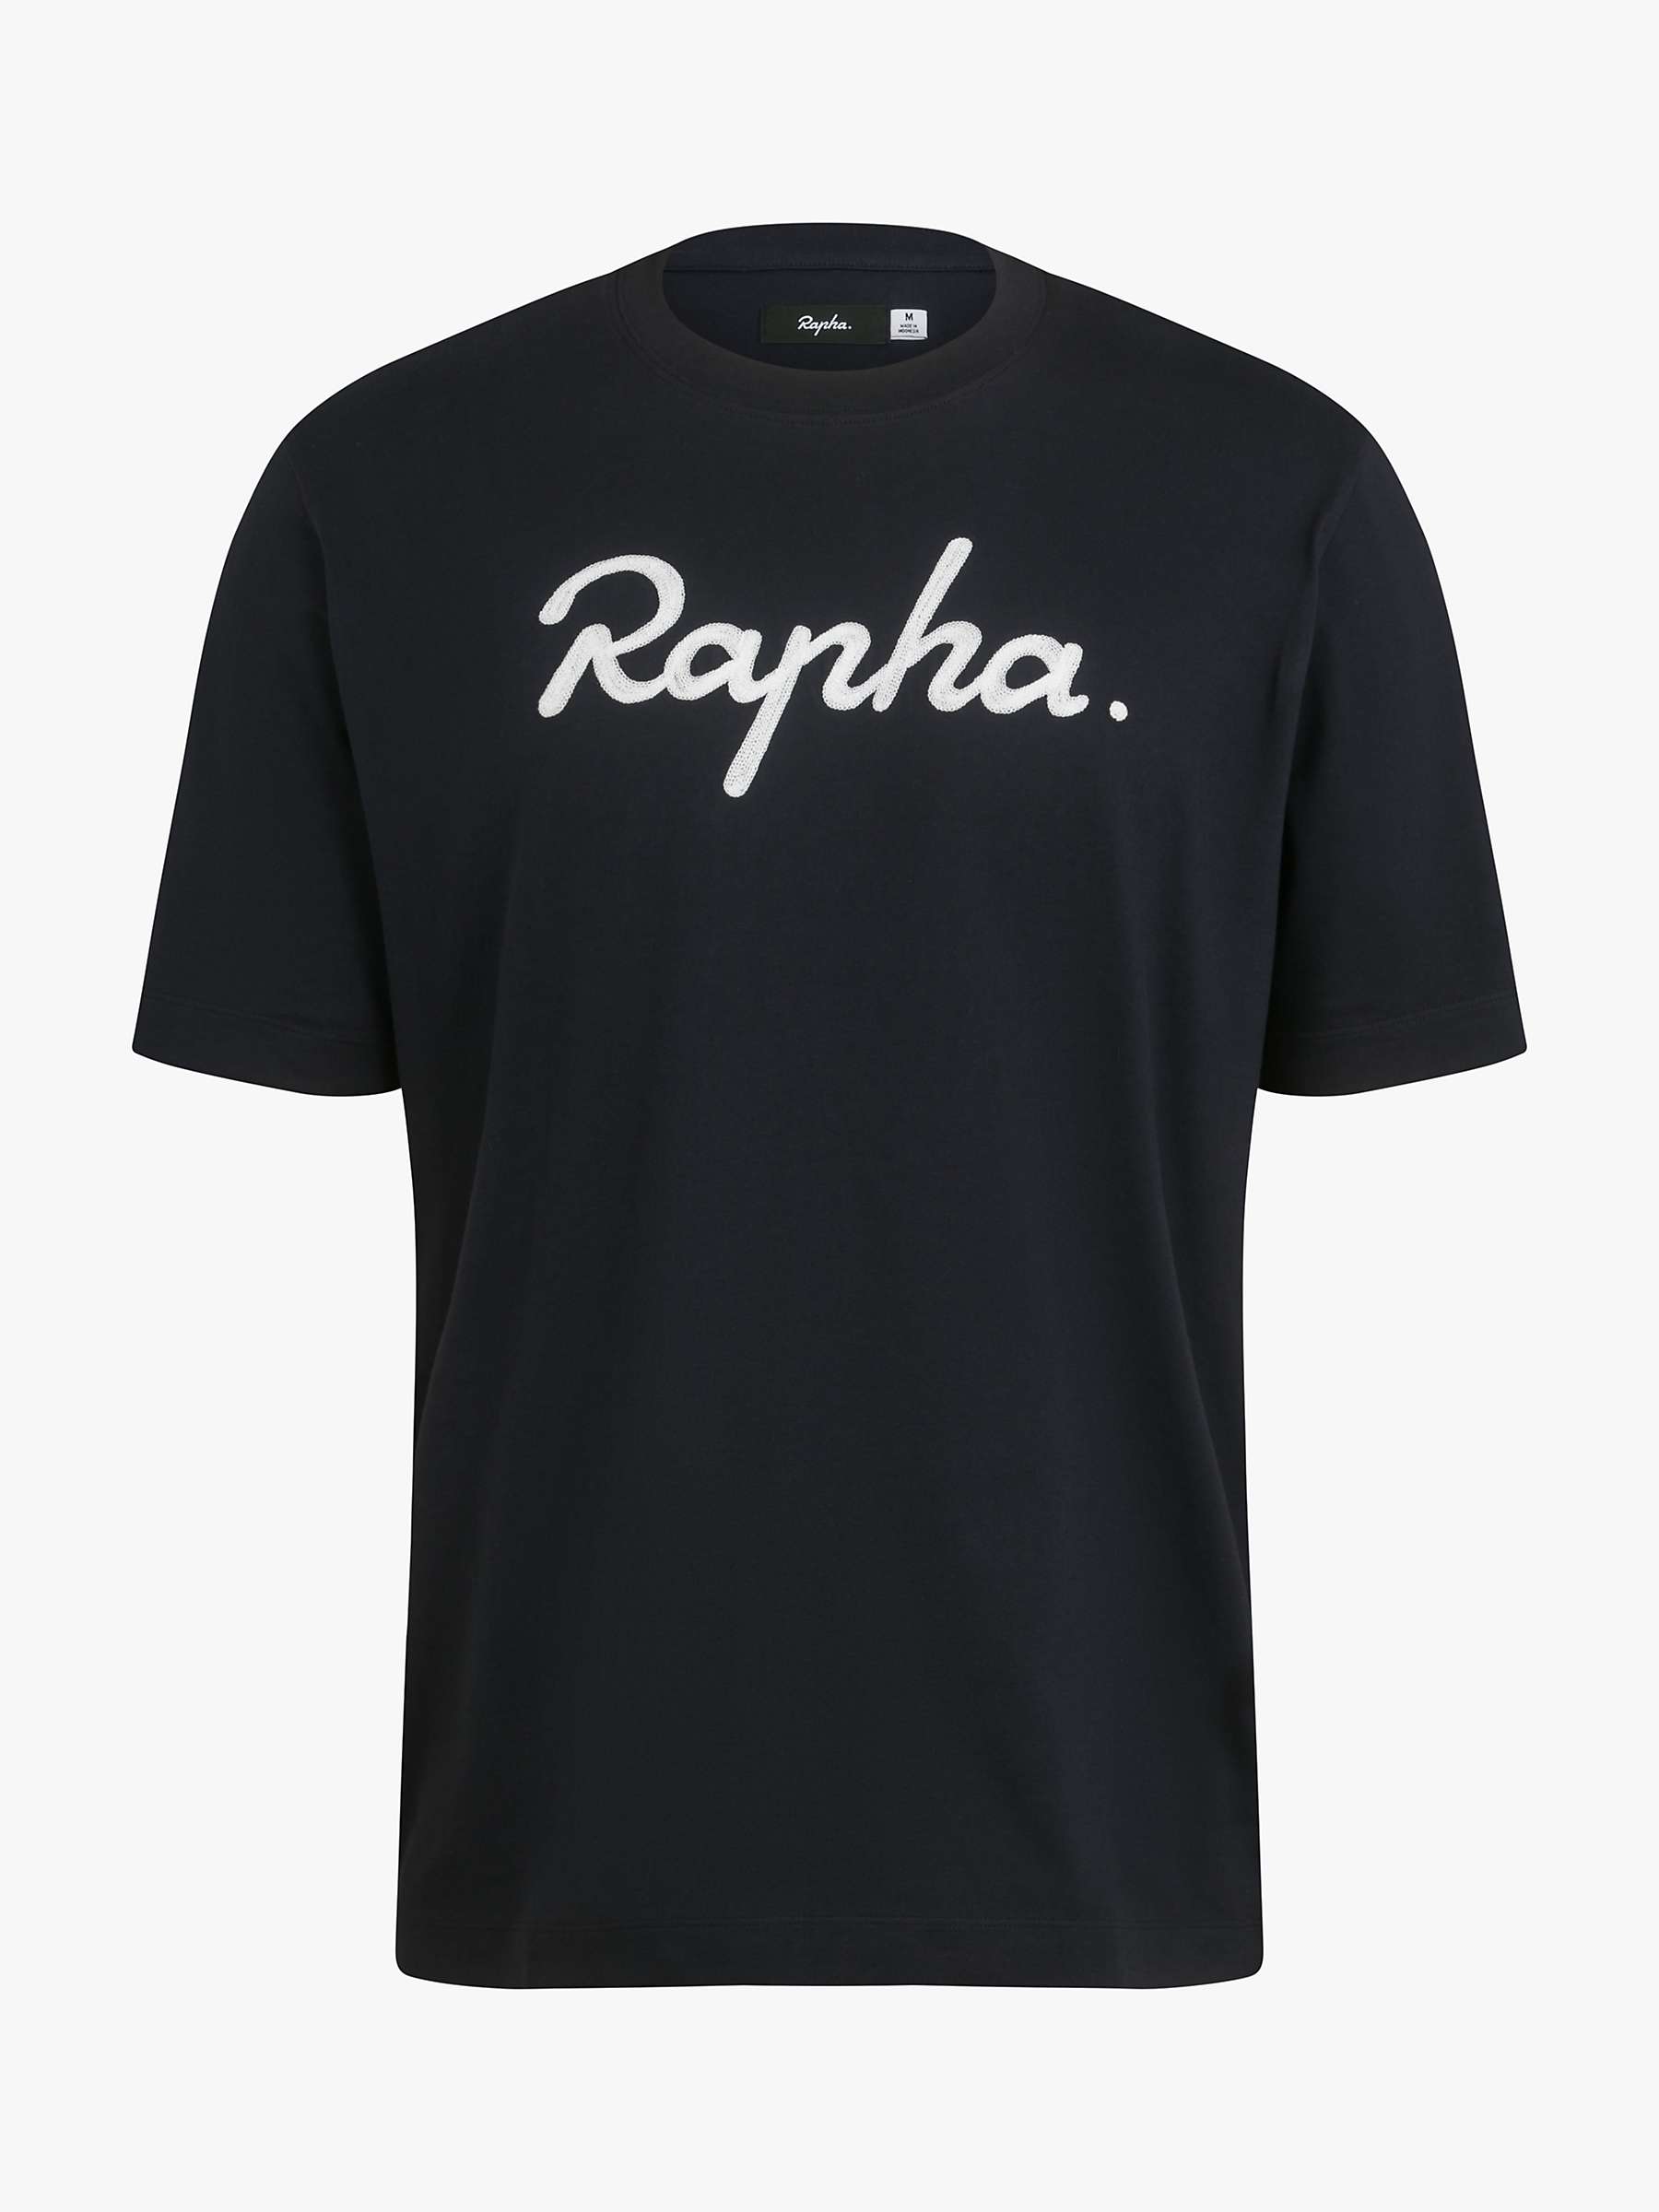 Buy Rapha Chain Stitched Logo T-Shirt Online at johnlewis.com